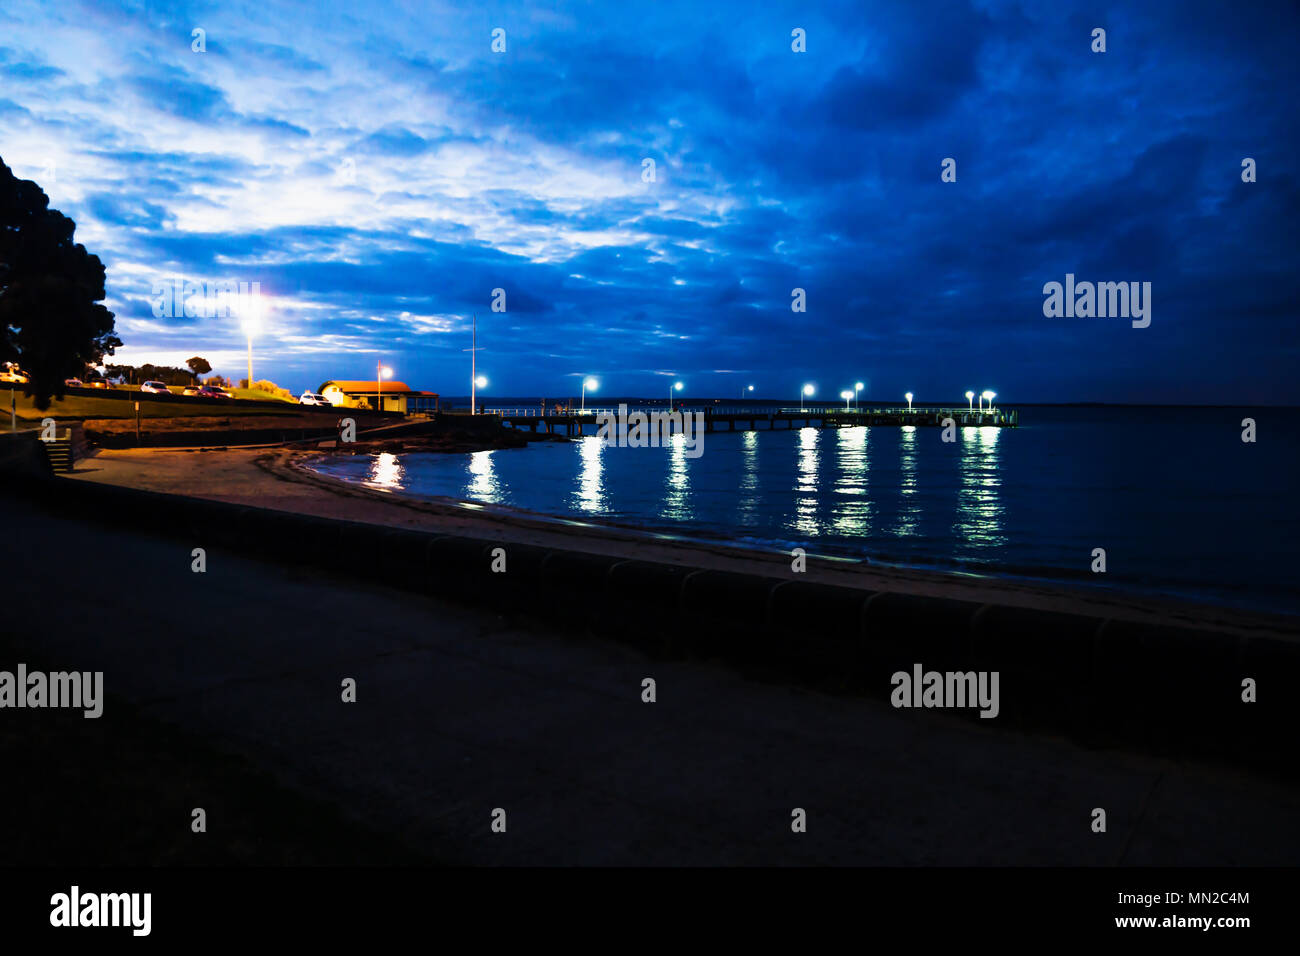 Pier jetty with lights at night with dramatic blue cloudscape, Cowes, Phillip Island, Victoria, Australia Stock Photo